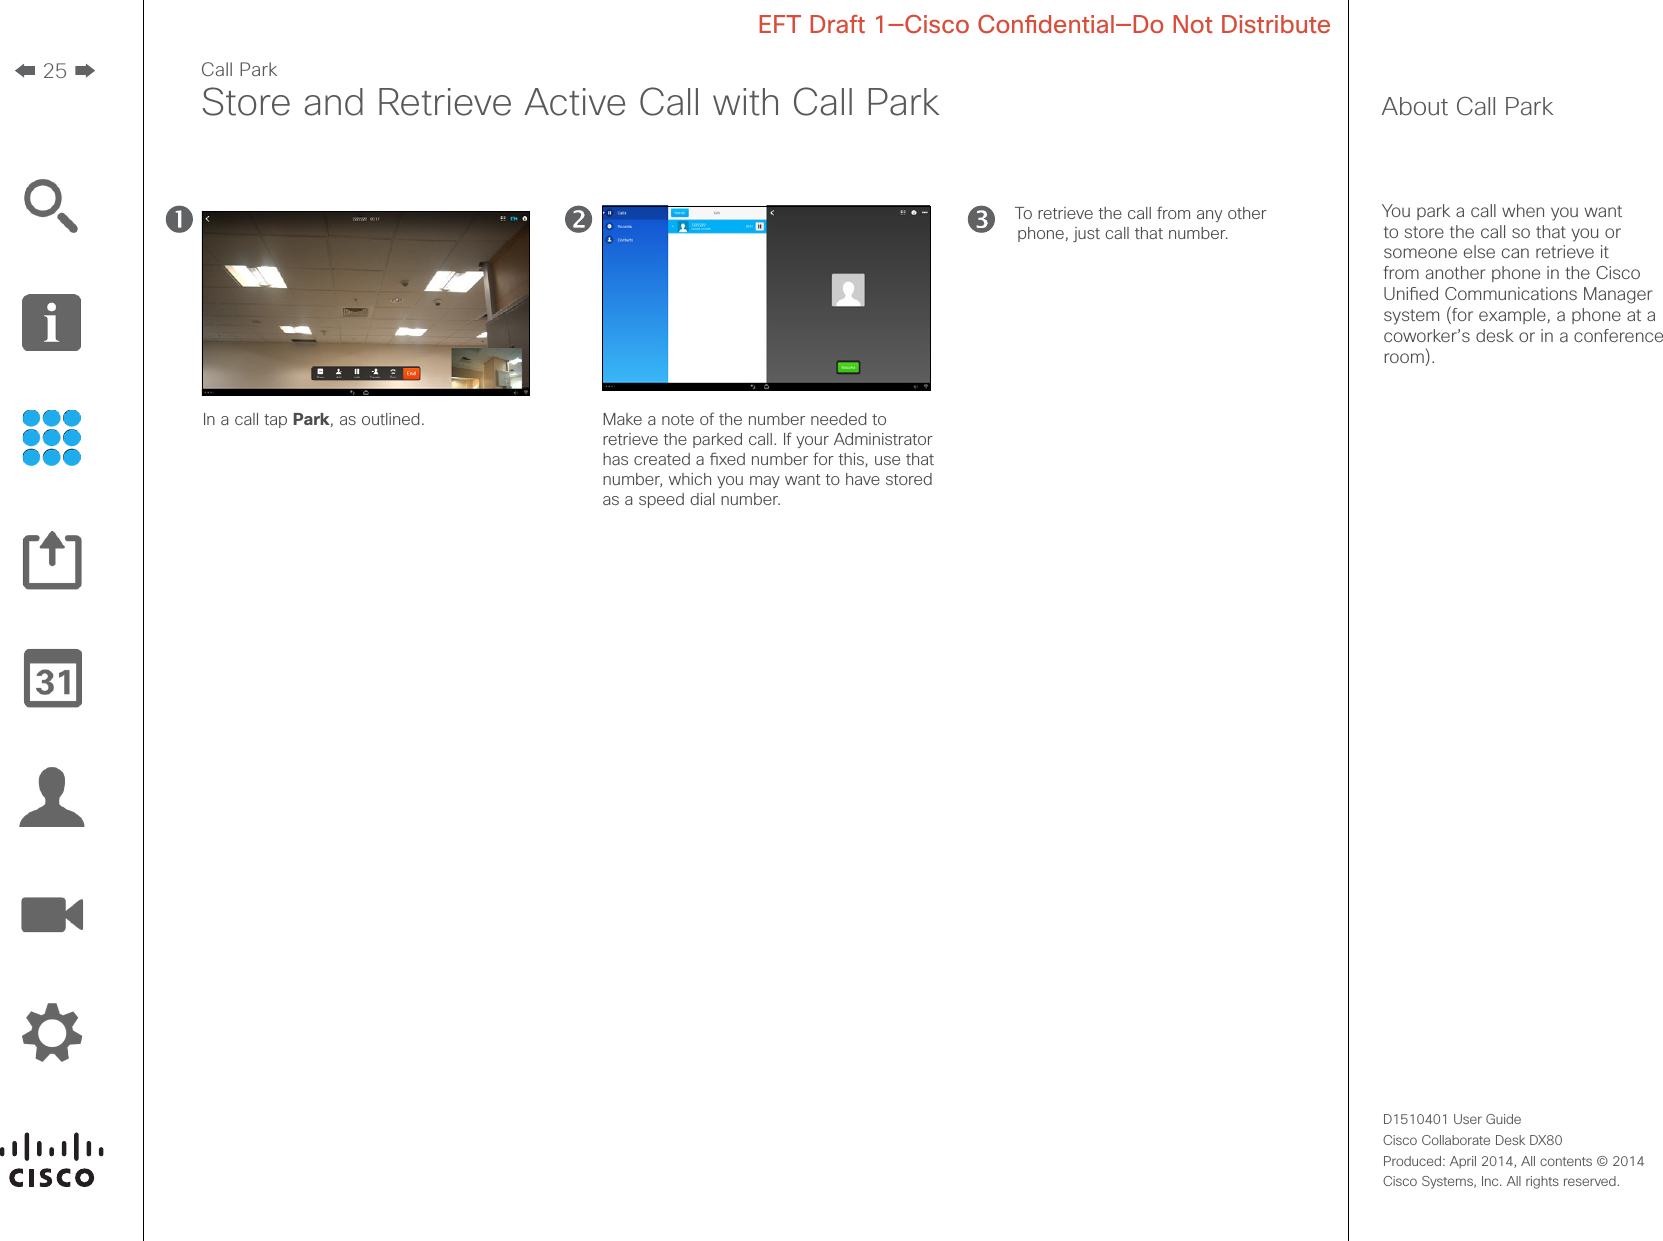 25D1510401 User Guide  Cisco Collaborate Desk DX80Produced: April 2014, All contents © 2014  Cisco Systems, Inc. All rights reserved. EFT Draft 1—Cisco Condential—Do Not DistributeCall ParkStore and Retrieve Active Call with Call Park About Call ParkYou park a call when you want to store the call so that you or someone else can retrieve it from another phone in the Cisco Unied Communications Manager system (for example, a phone at a coworker’s desk or in a conference room).In a call tap Park, as outlined. Make a note of the number needed to retrieve the parked call. If your Administrator has created a xed number for this, use that number, which you may want to have stored as a speed dial number.To retrieve the call from any other phone, just call that number. 